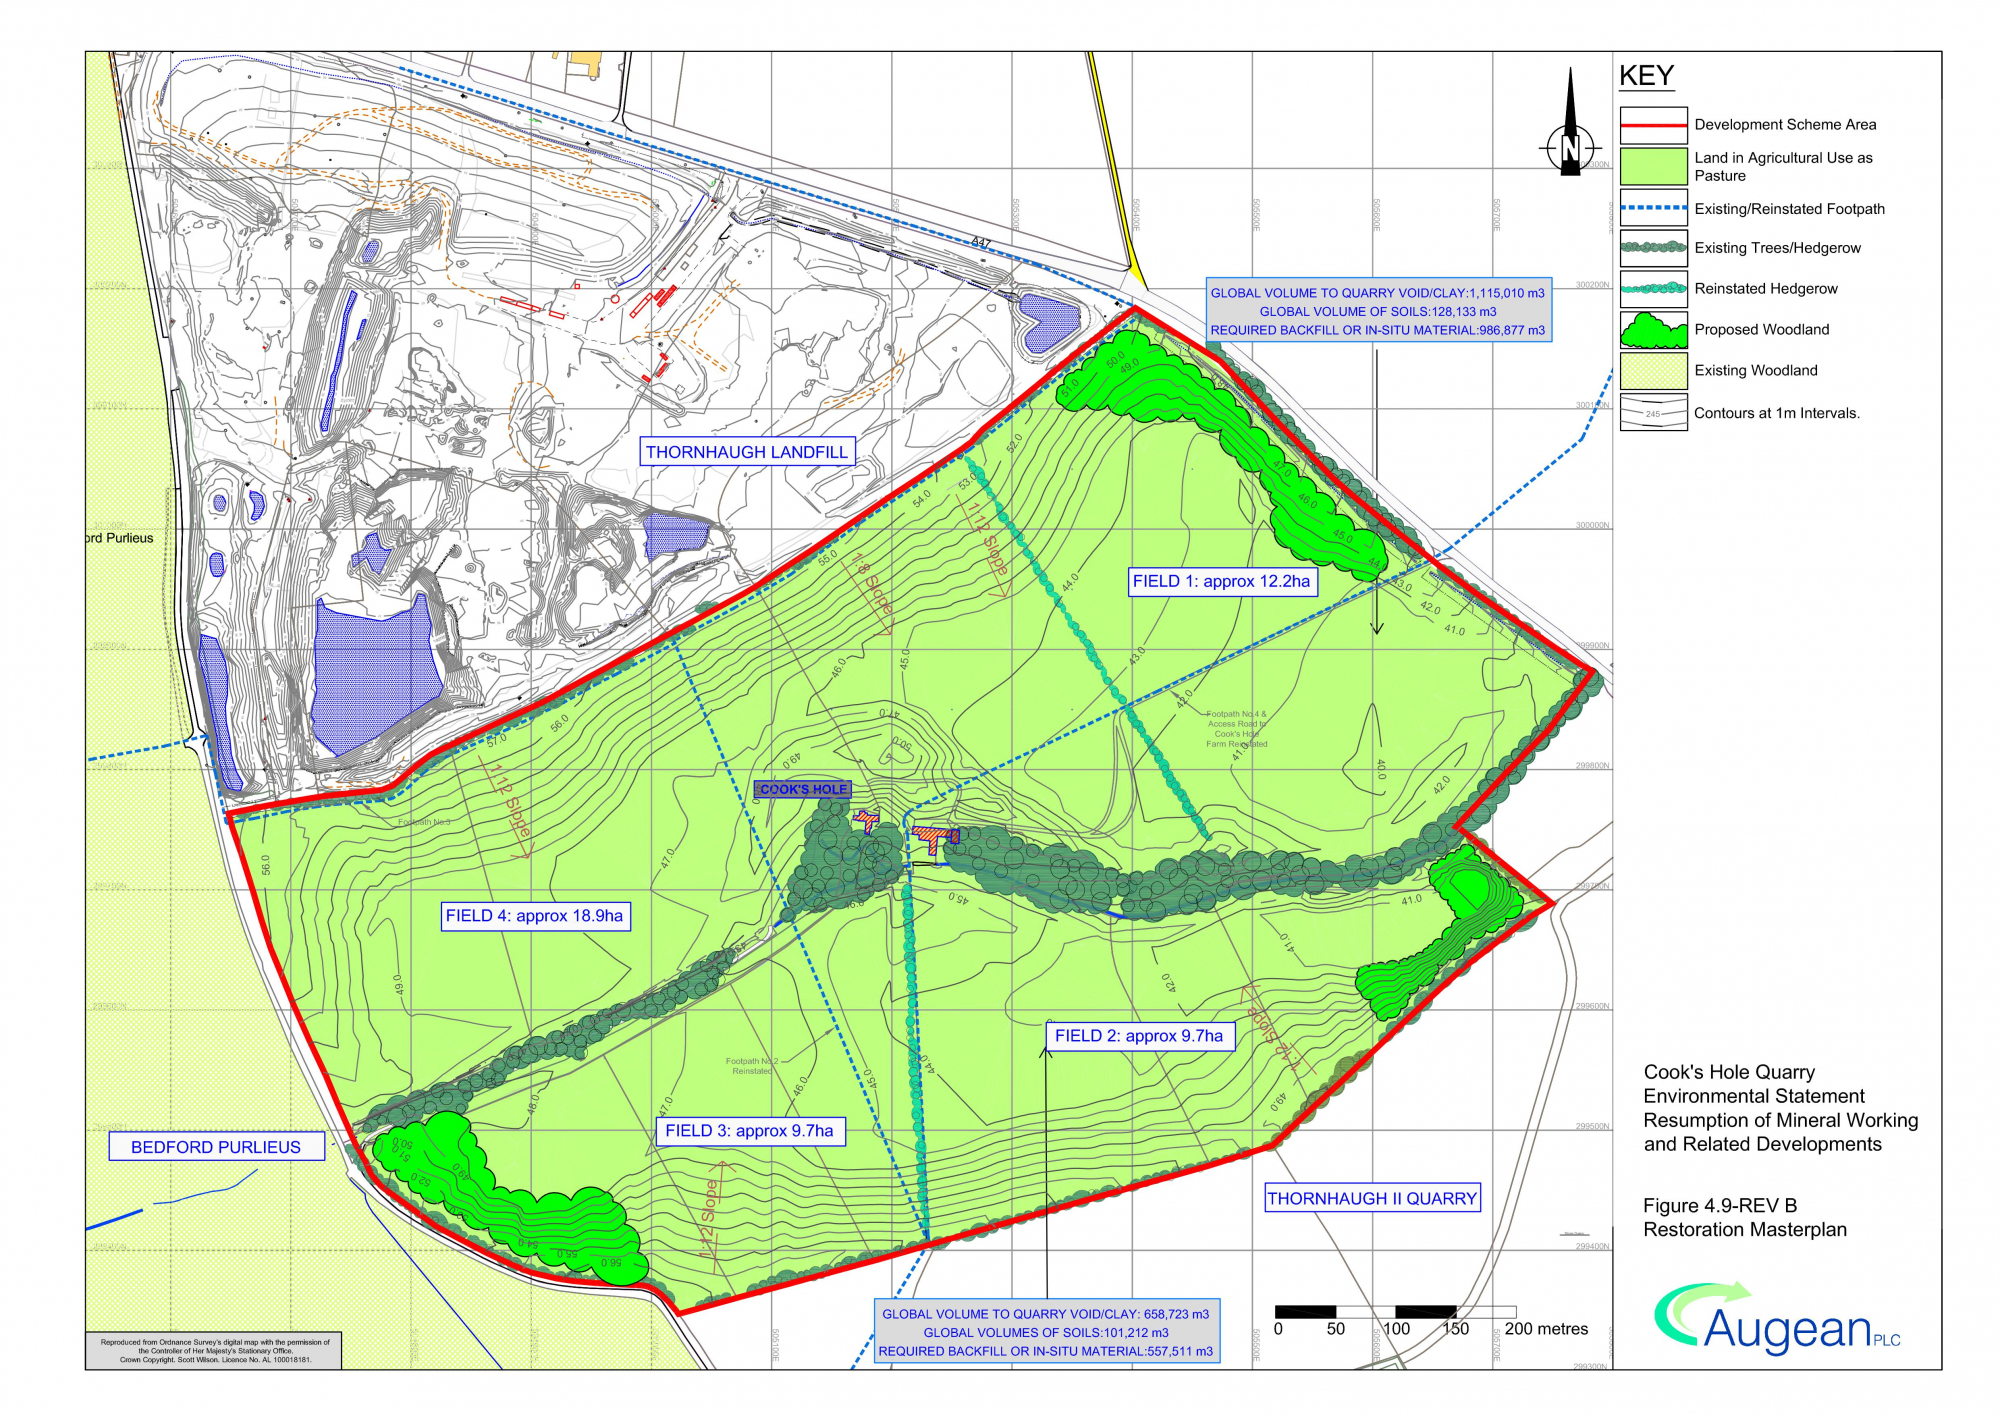 Appendix A Approved restoration scheme for Cooks Hole